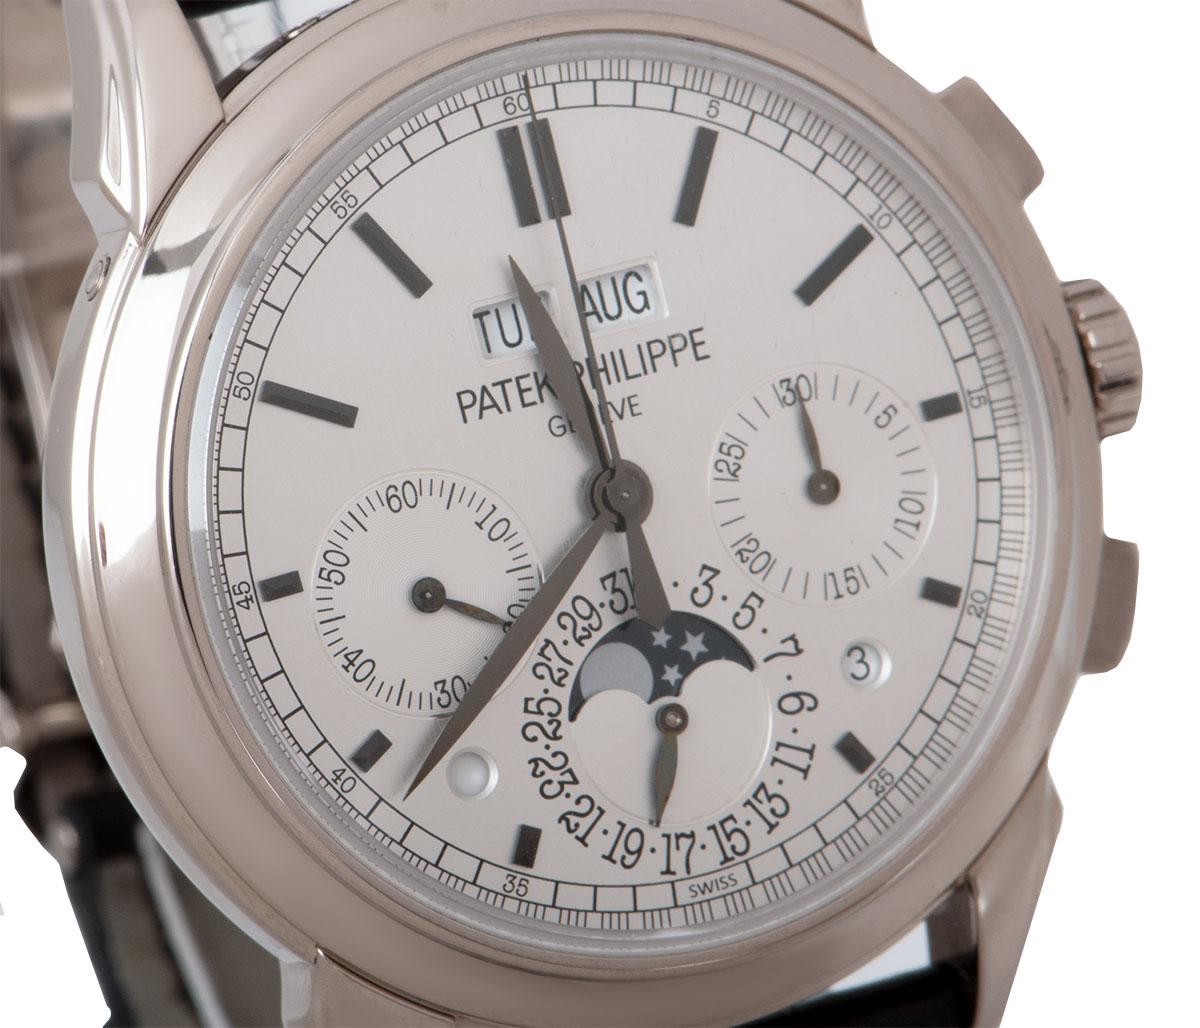 A 41 mm Grand Complications Perpetual Calendar Chronograph, in white gold by Patek Philippe. It's silver dial concealed with sapphire crystal features a 30 minute counter, moon phases with the date, day/night display and small seconds. The day and